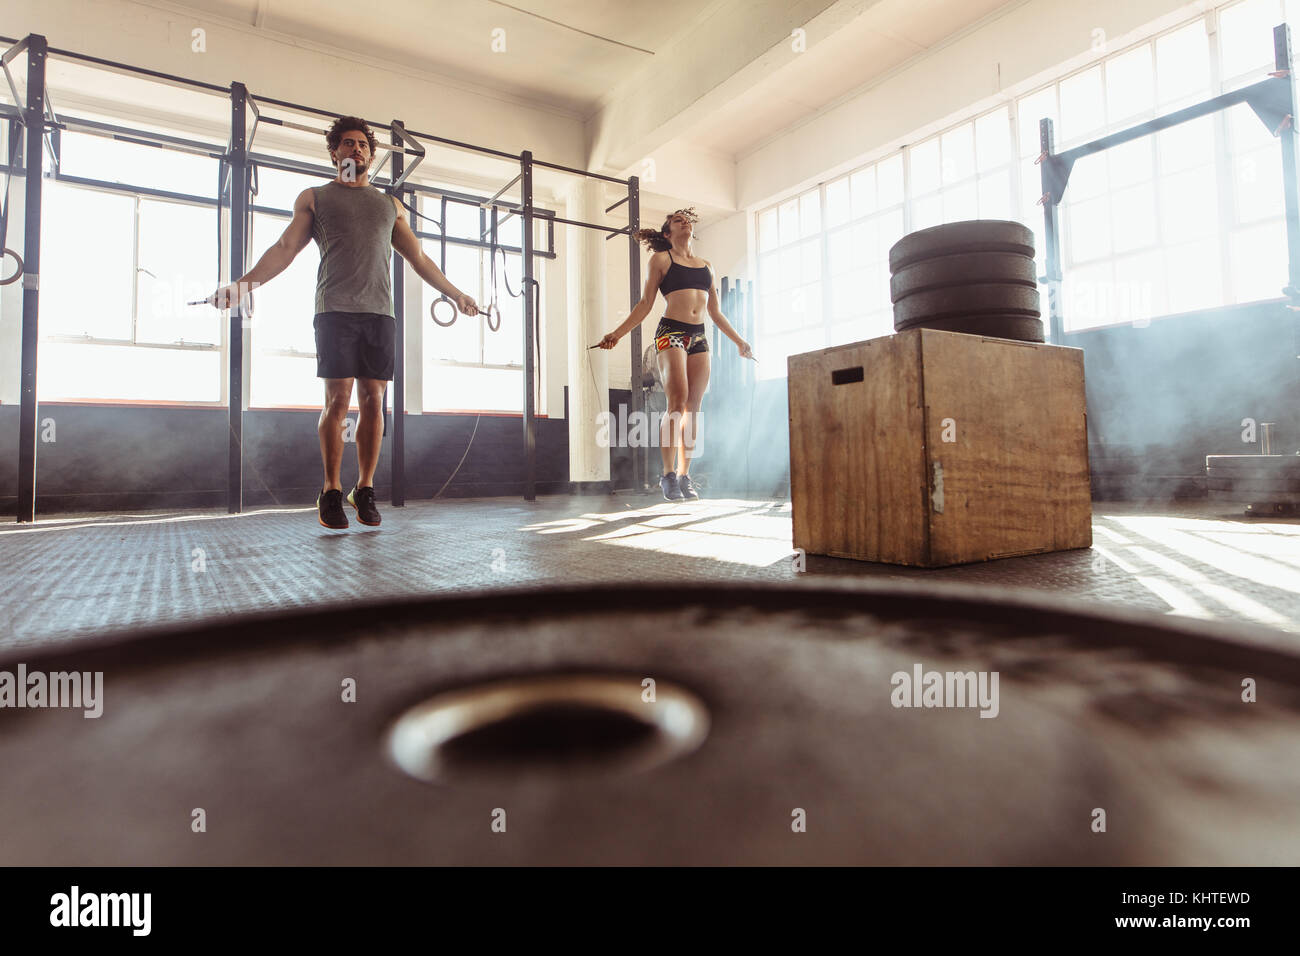 Muscular man and woman workout with jumping ropes in cross training gym. Fit young couple skipping ropes as part of their workout at health club. Stock Photo